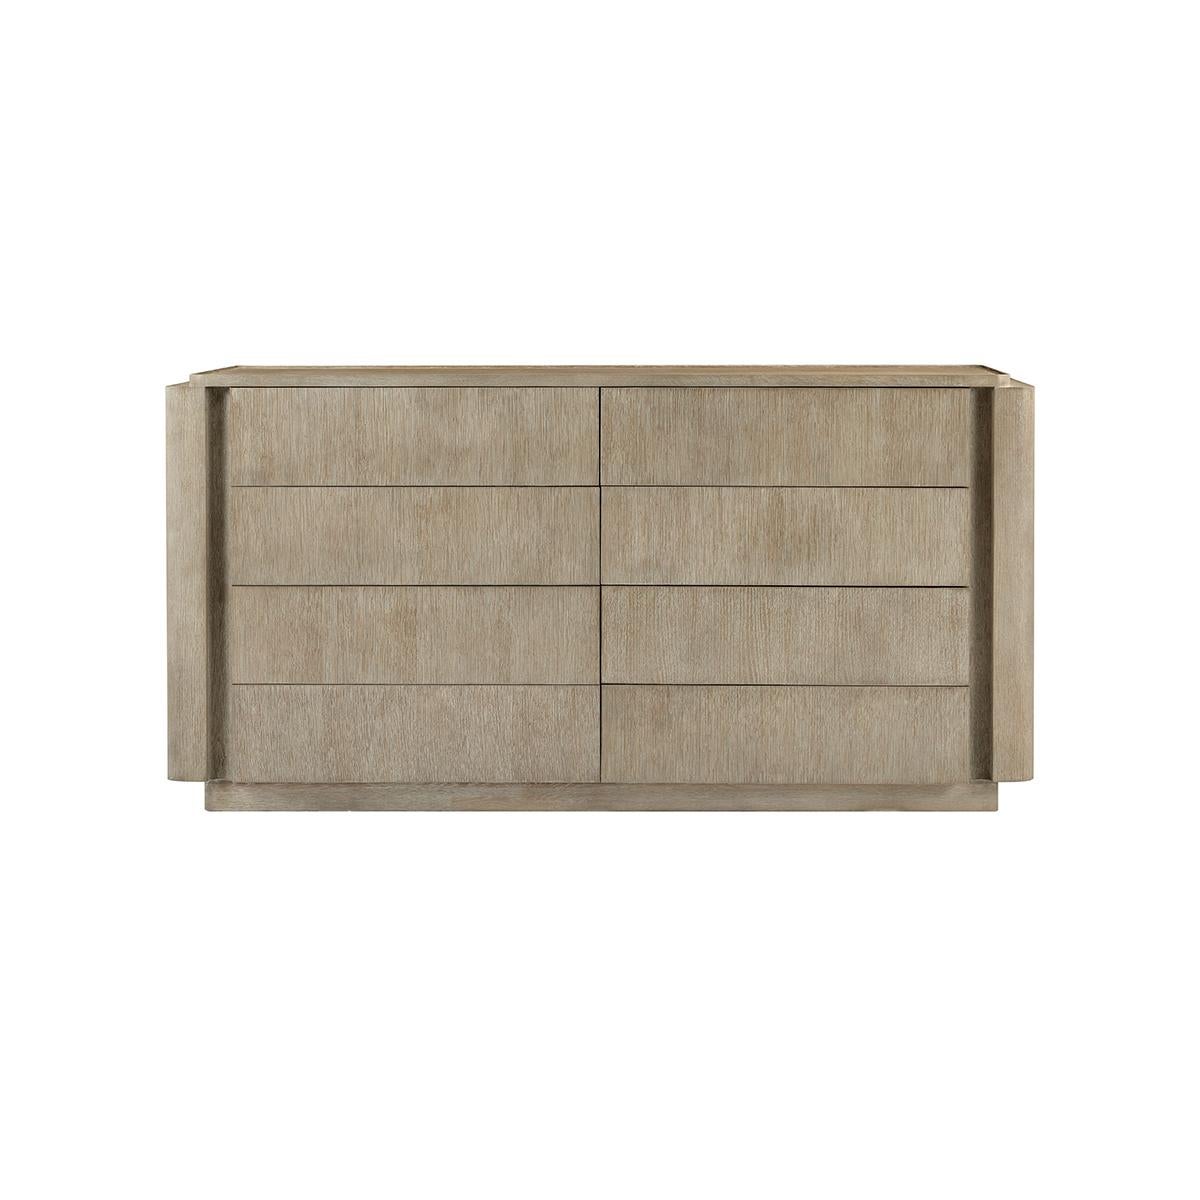 With a wire-brushed white oak in our light grey oak finish. This dresser is horizontally configured enabling it to not be an intrusive piece in the space and for the convenience of all who use it.

With eight drawers for ample storage and a lipped